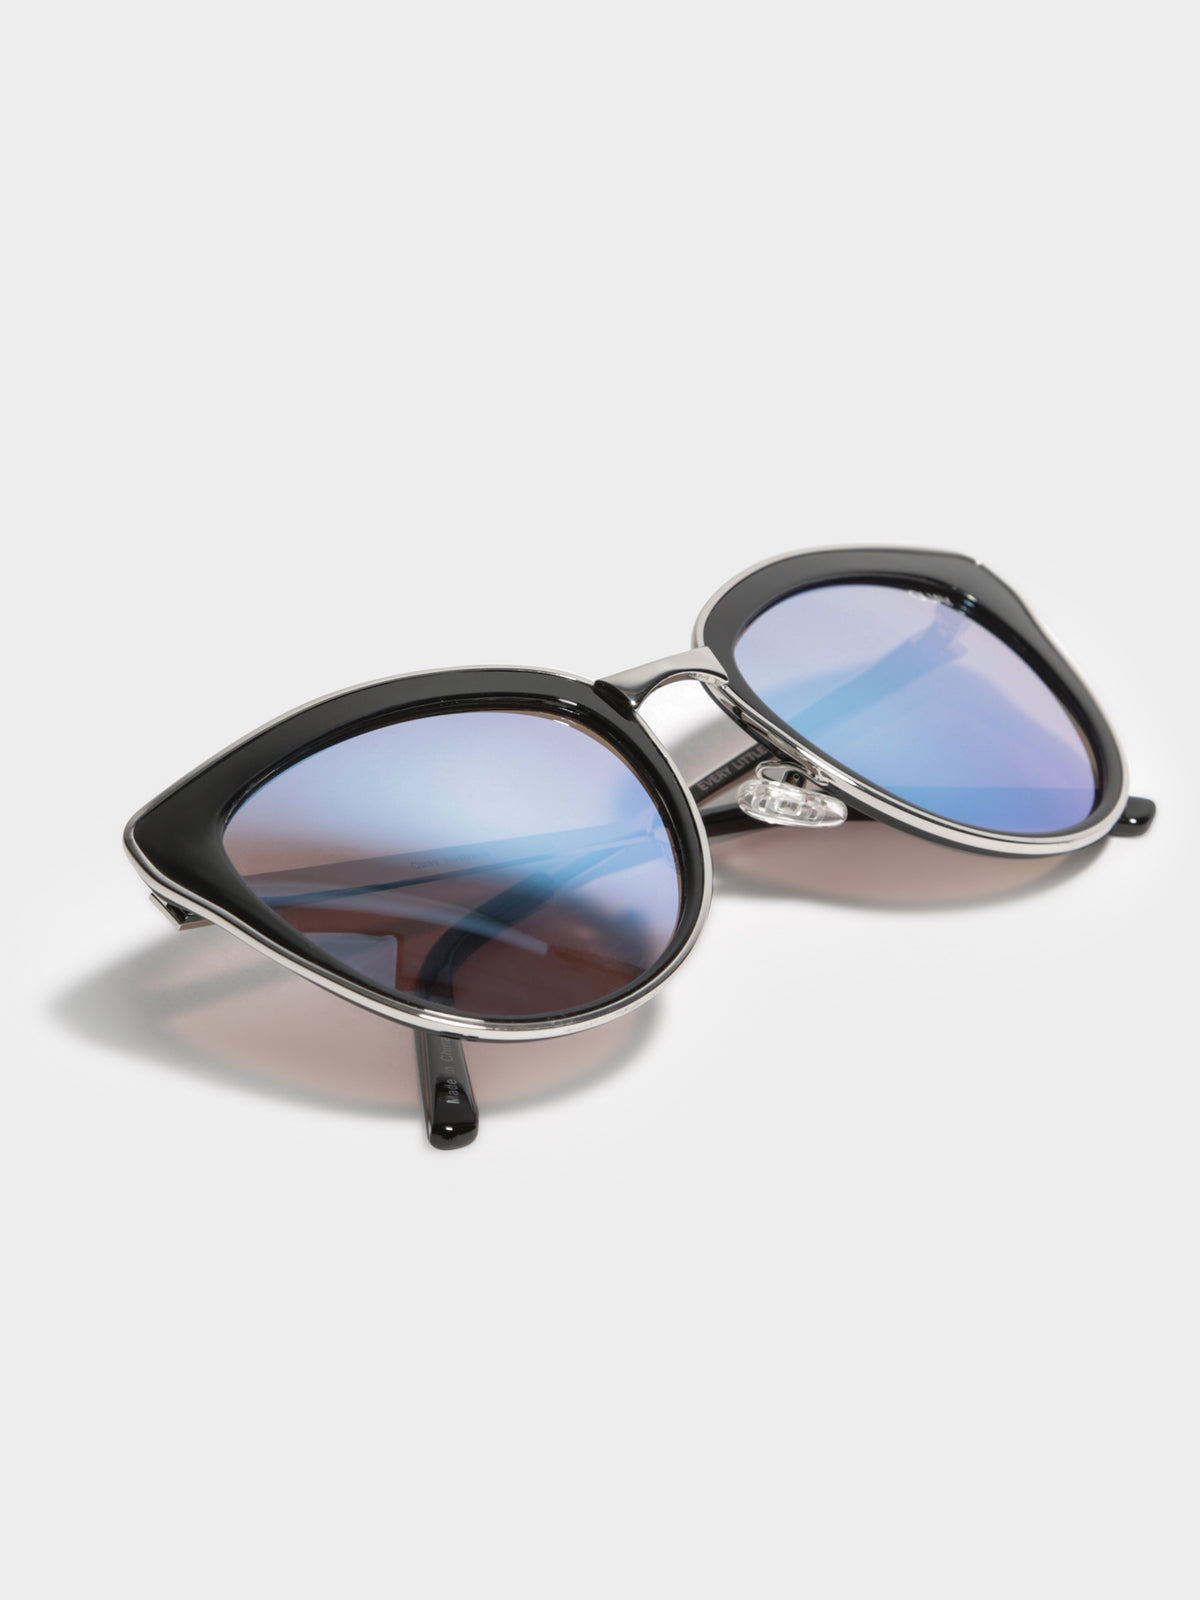 Every Little Thing Sunglasses in Black &amp; Lilac